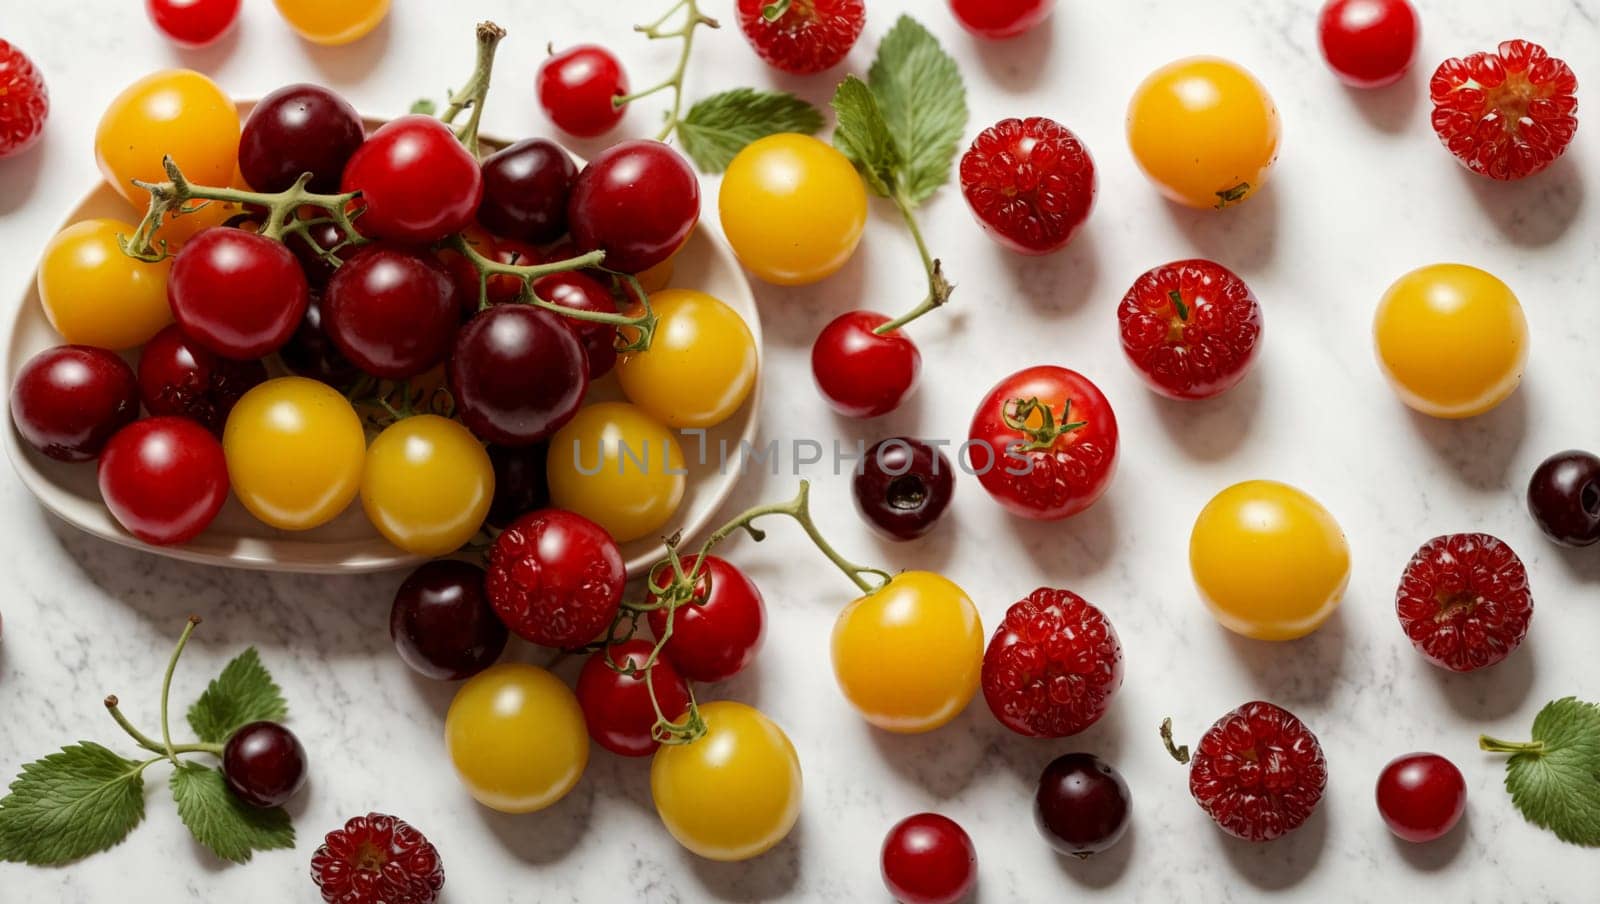 cherry berries, grapes, red and yellow tomatoes on a white background by Севостьянов